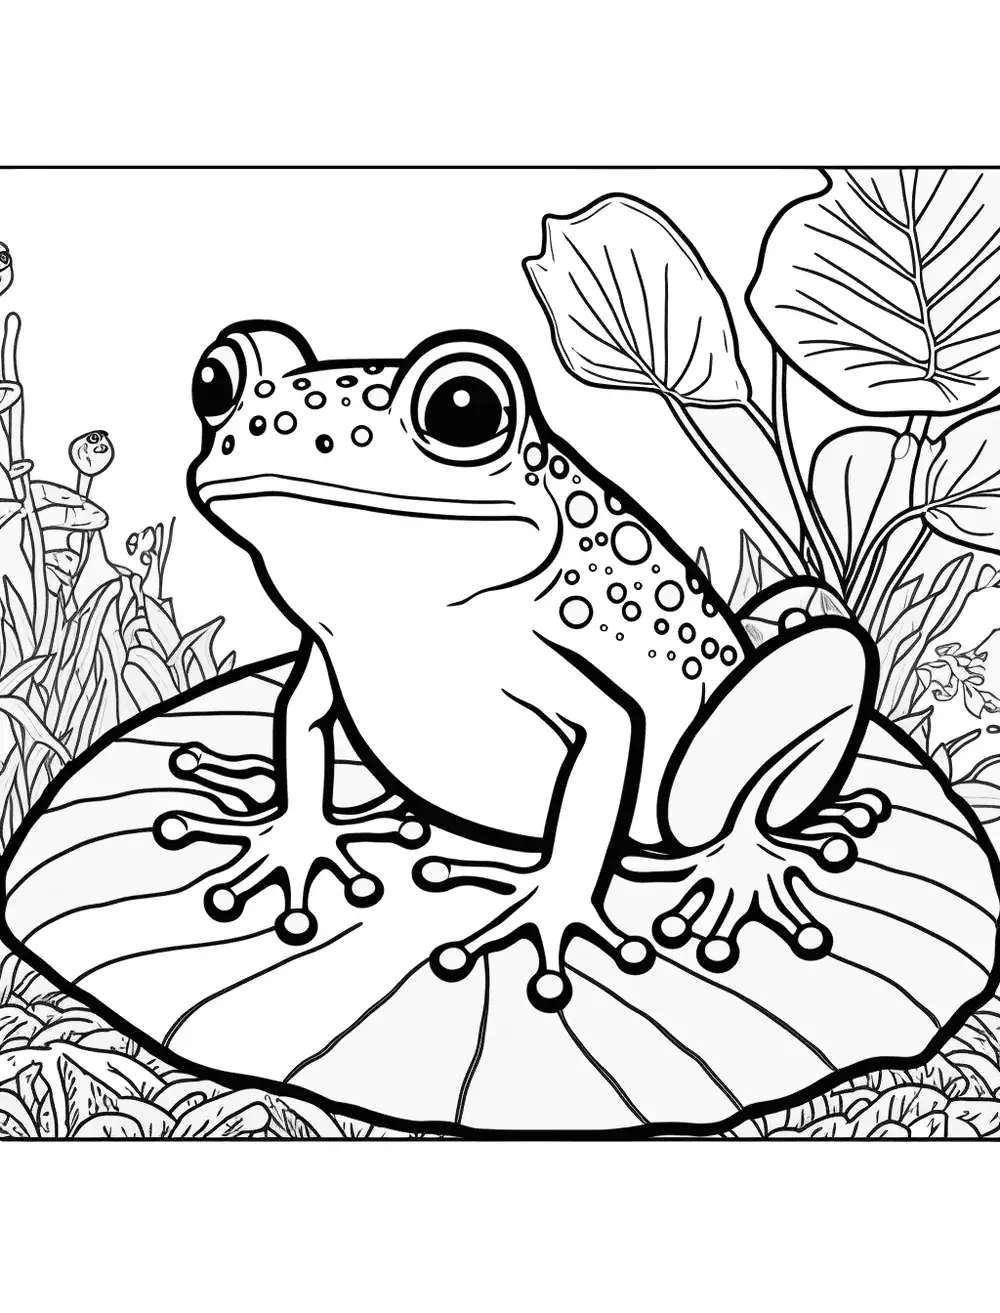 Rain Forest Frog Coloring Page - A frog in a lush, tropical rain forest environment